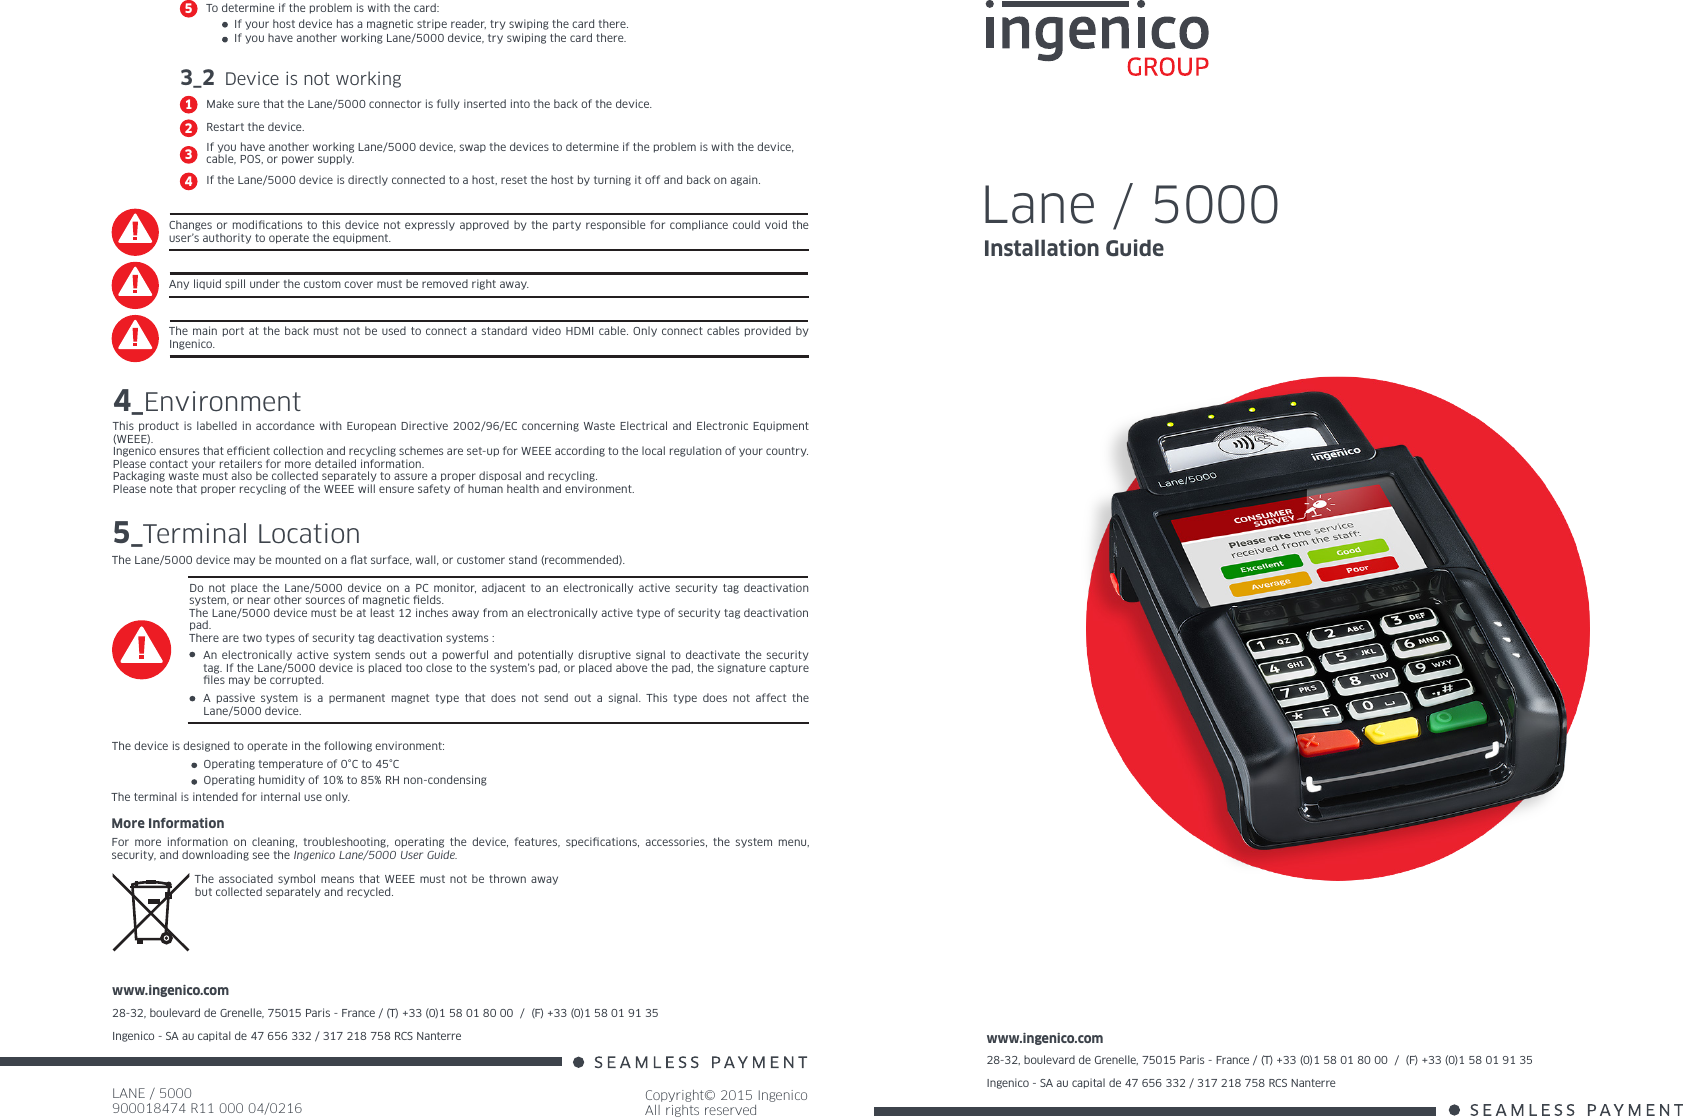 www.ingenico.com28-32, boulevard de Grenelle, 75015 Paris - France / (T) +33 (0)1 58 01 80 00  /  (F) +33 (0)1 58 01 91 35Ingenico - SA au capital de 47 656 332 / 317 218 758 RCS Nanterre LANE / 5000900018474 R11 000 04/0216Copyright© 2015 IngenicoAll rights reservedwww.ingenico.com28-32, boulevard de Grenelle, 75015 Paris - France / (T) +33 (0)1 58 01 80 00  /  (F) +33 (0)1 58 01 91 35Ingenico - SA au capital de 47 656 332 / 317 218 758 RCS Nanterre Changes or modications to this device not expressly approved by the party responsible for compliance could void the user’s authority to operate the equipment.Any liquid spill under the custom cover must be removed right away.The main port at the back must not be used to connect a standard video HDMI cable. Only connect cables provided by Ingenico.4_EnvironmentThis product is labelled in accordance with European Directive 2002/96/EC concerning Waste Electrical and Electronic Equipment (WEEE).Ingenico ensures that efcient collection and recycling schemes are set-up for WEEE according to the local regulation of your country. Please contact your retailers for more detailed information.Packaging waste must also be collected separately to assure a proper disposal and recycling. Please note that proper recycling of the WEEE will ensure safety of human health and environment.More InformationFor more information on cleaning, troubleshooting, operating the device, features, specications, accessories, the system menu, security, and downloading see the Ingenico Lane/5000 User Guide.The associated symbol means that WEEE must not be thrown away but collected separately and recycled.5_Terminal LocationThe Lane/5000 device may be mounted on a at surface, wall, or customer stand (recommended).The device is designed to operate in the following environment:Operating temperature of 0°C to 45°C Operating humidity of 10% to 85% RH non-condensingThe terminal is intended for internal use only.Do not place the Lane/5000 device on a PC monitor, adjacent to an electronically active security tag deactivation system, or near other sources of magnetic elds.The Lane/5000 device must be at least 12 inches away from an electronically active type of security tag deactivation pad.There are two types of security tag deactivation systems :An electronically active system sends out a powerful and potentially disruptive signal to deactivate the security tag. If the Lane/5000 device is placed too close to the system’s pad, or placed above the pad, the signature capture les may be corrupted.A passive system is a permanent magnet type that does not send out a signal. This type does not affect the Lane/5000 device.3_2 Device is not workingMake sure that the Lane/5000 connector is fully inserted into the back of the device.1Restart the device.2If you have another working Lane/5000 device, swap the devices to determine if the problem is with the device, cable, POS, or power supply.3If the Lane/5000 device is directly connected to a host, reset the host by turning it off and back on again.4Lane / 5000Installation GuideIf your host device has a magnetic stripe reader, try swiping the card there.If you have another working Lane/5000 device, try swiping the card there.To determine if the problem is with the card:5